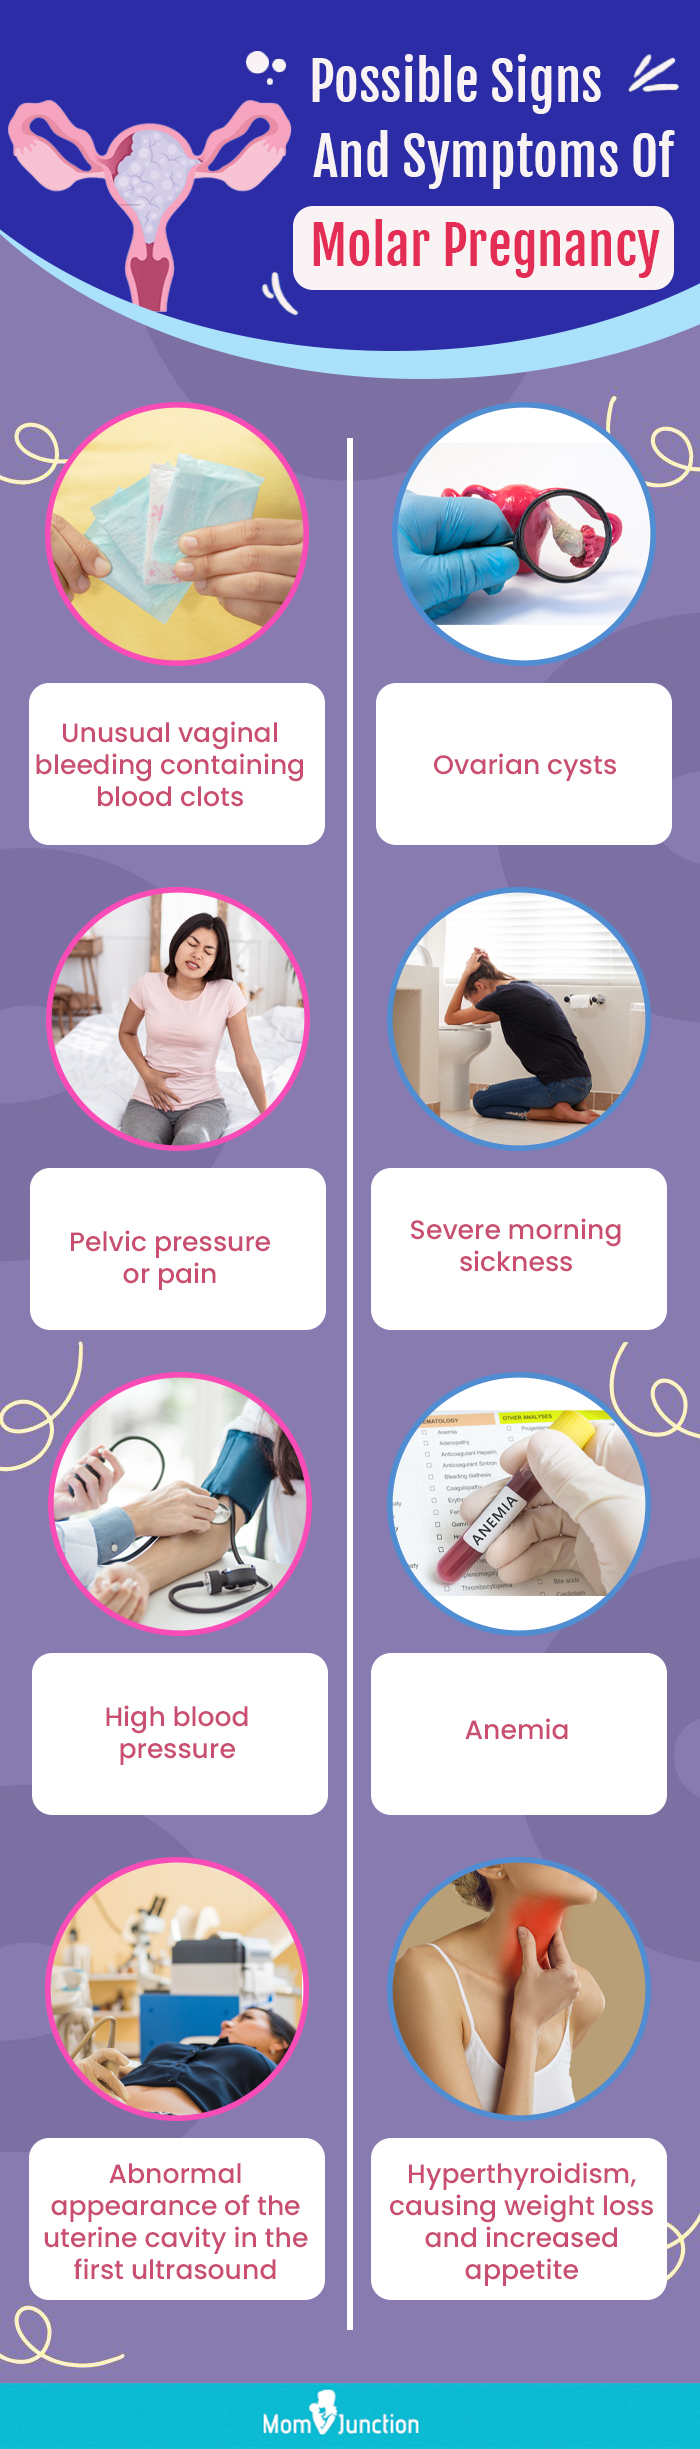 possible signs and symptoms of molar pregnancy(infographic)